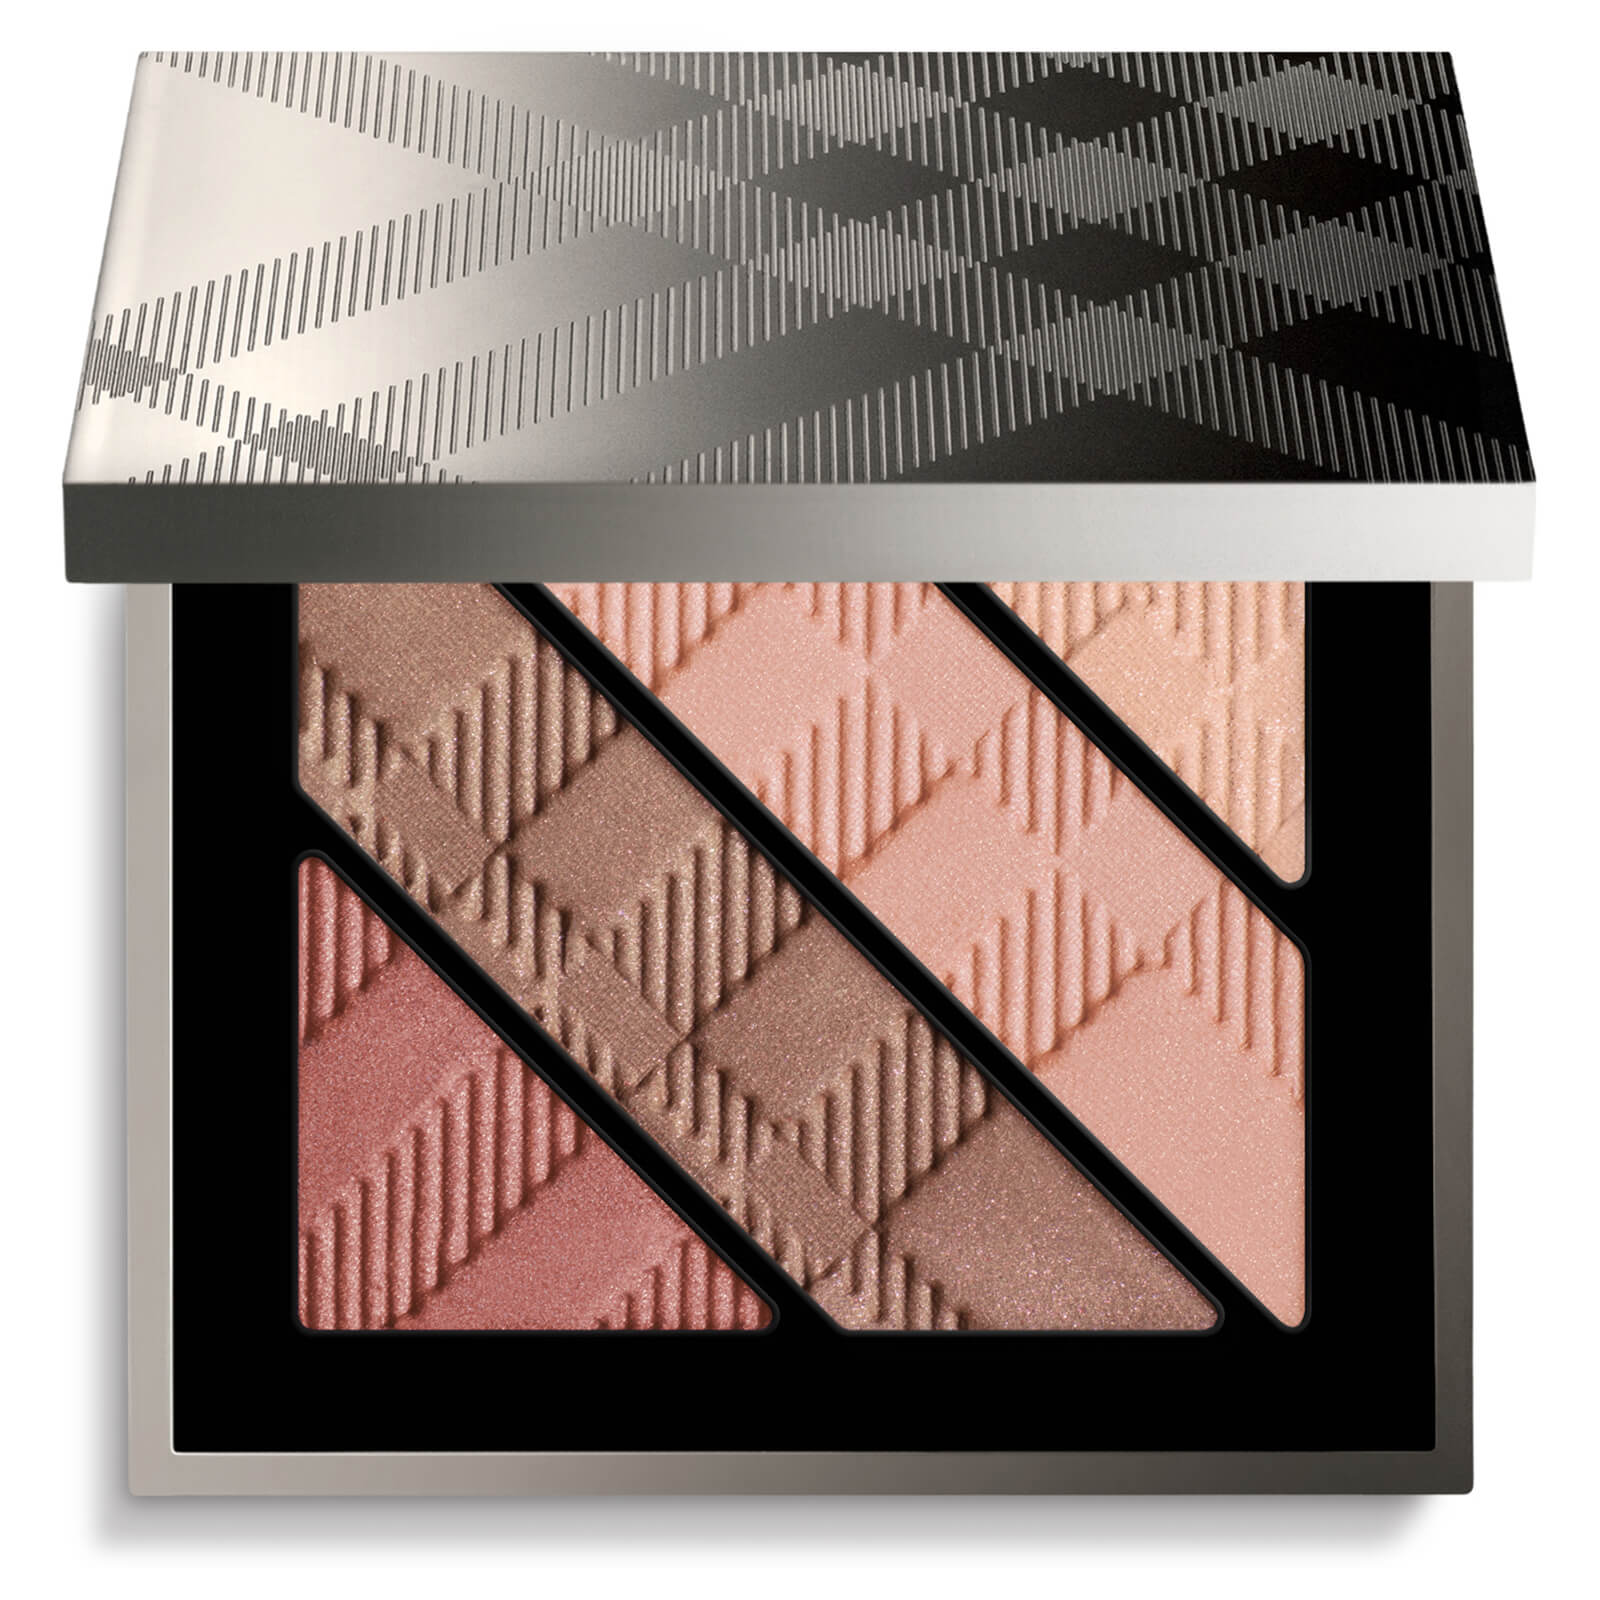 burberry complete eye palette rose pink